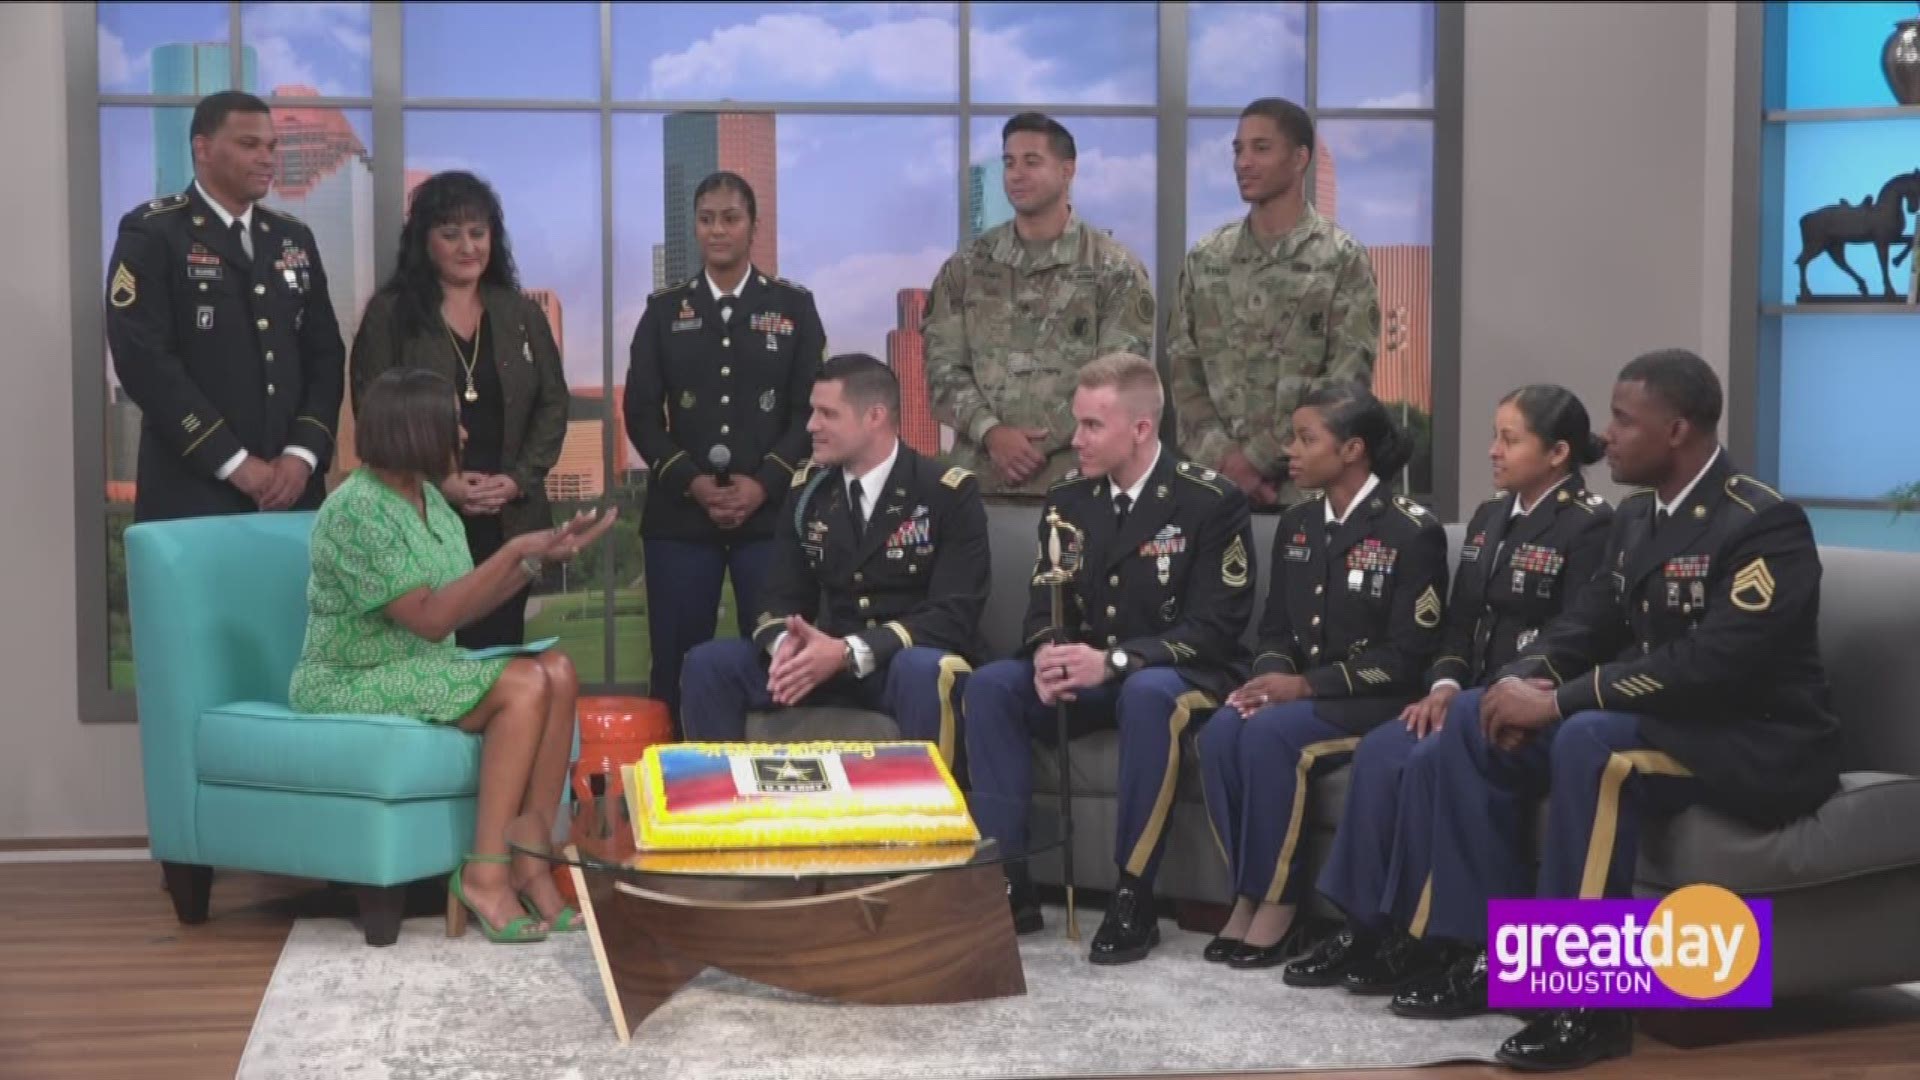 The U.S. Army stopped by Great Day Houston to celebrate their birthday.